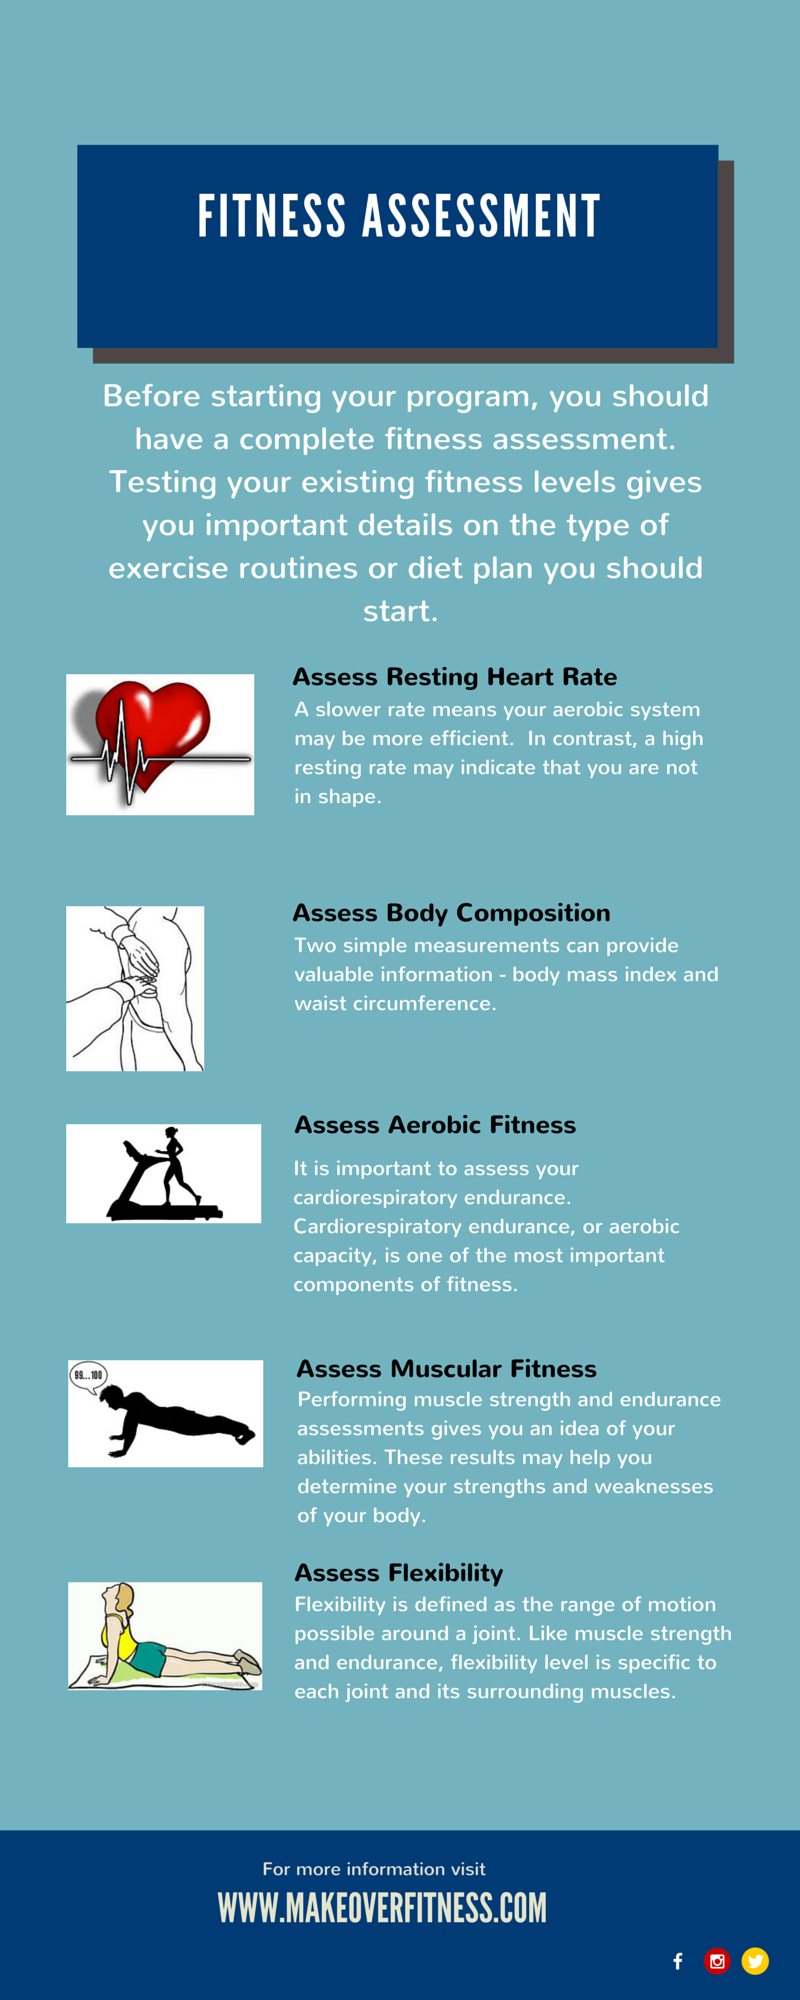 Fitness assessment infographic that you can download and print.